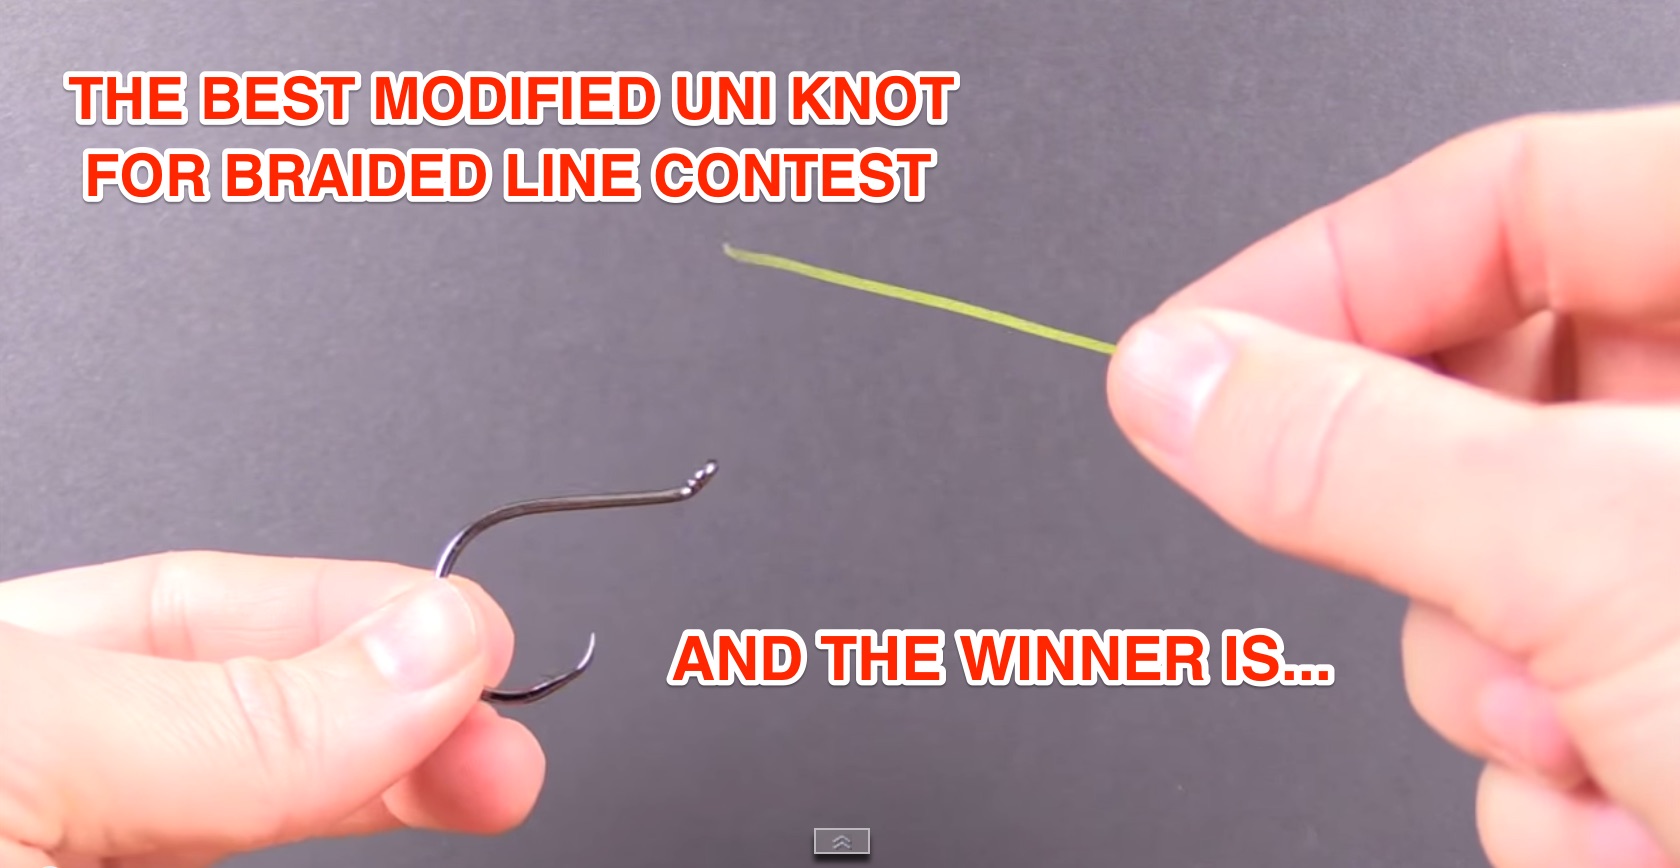 http://uni%20knot%20for%20braid